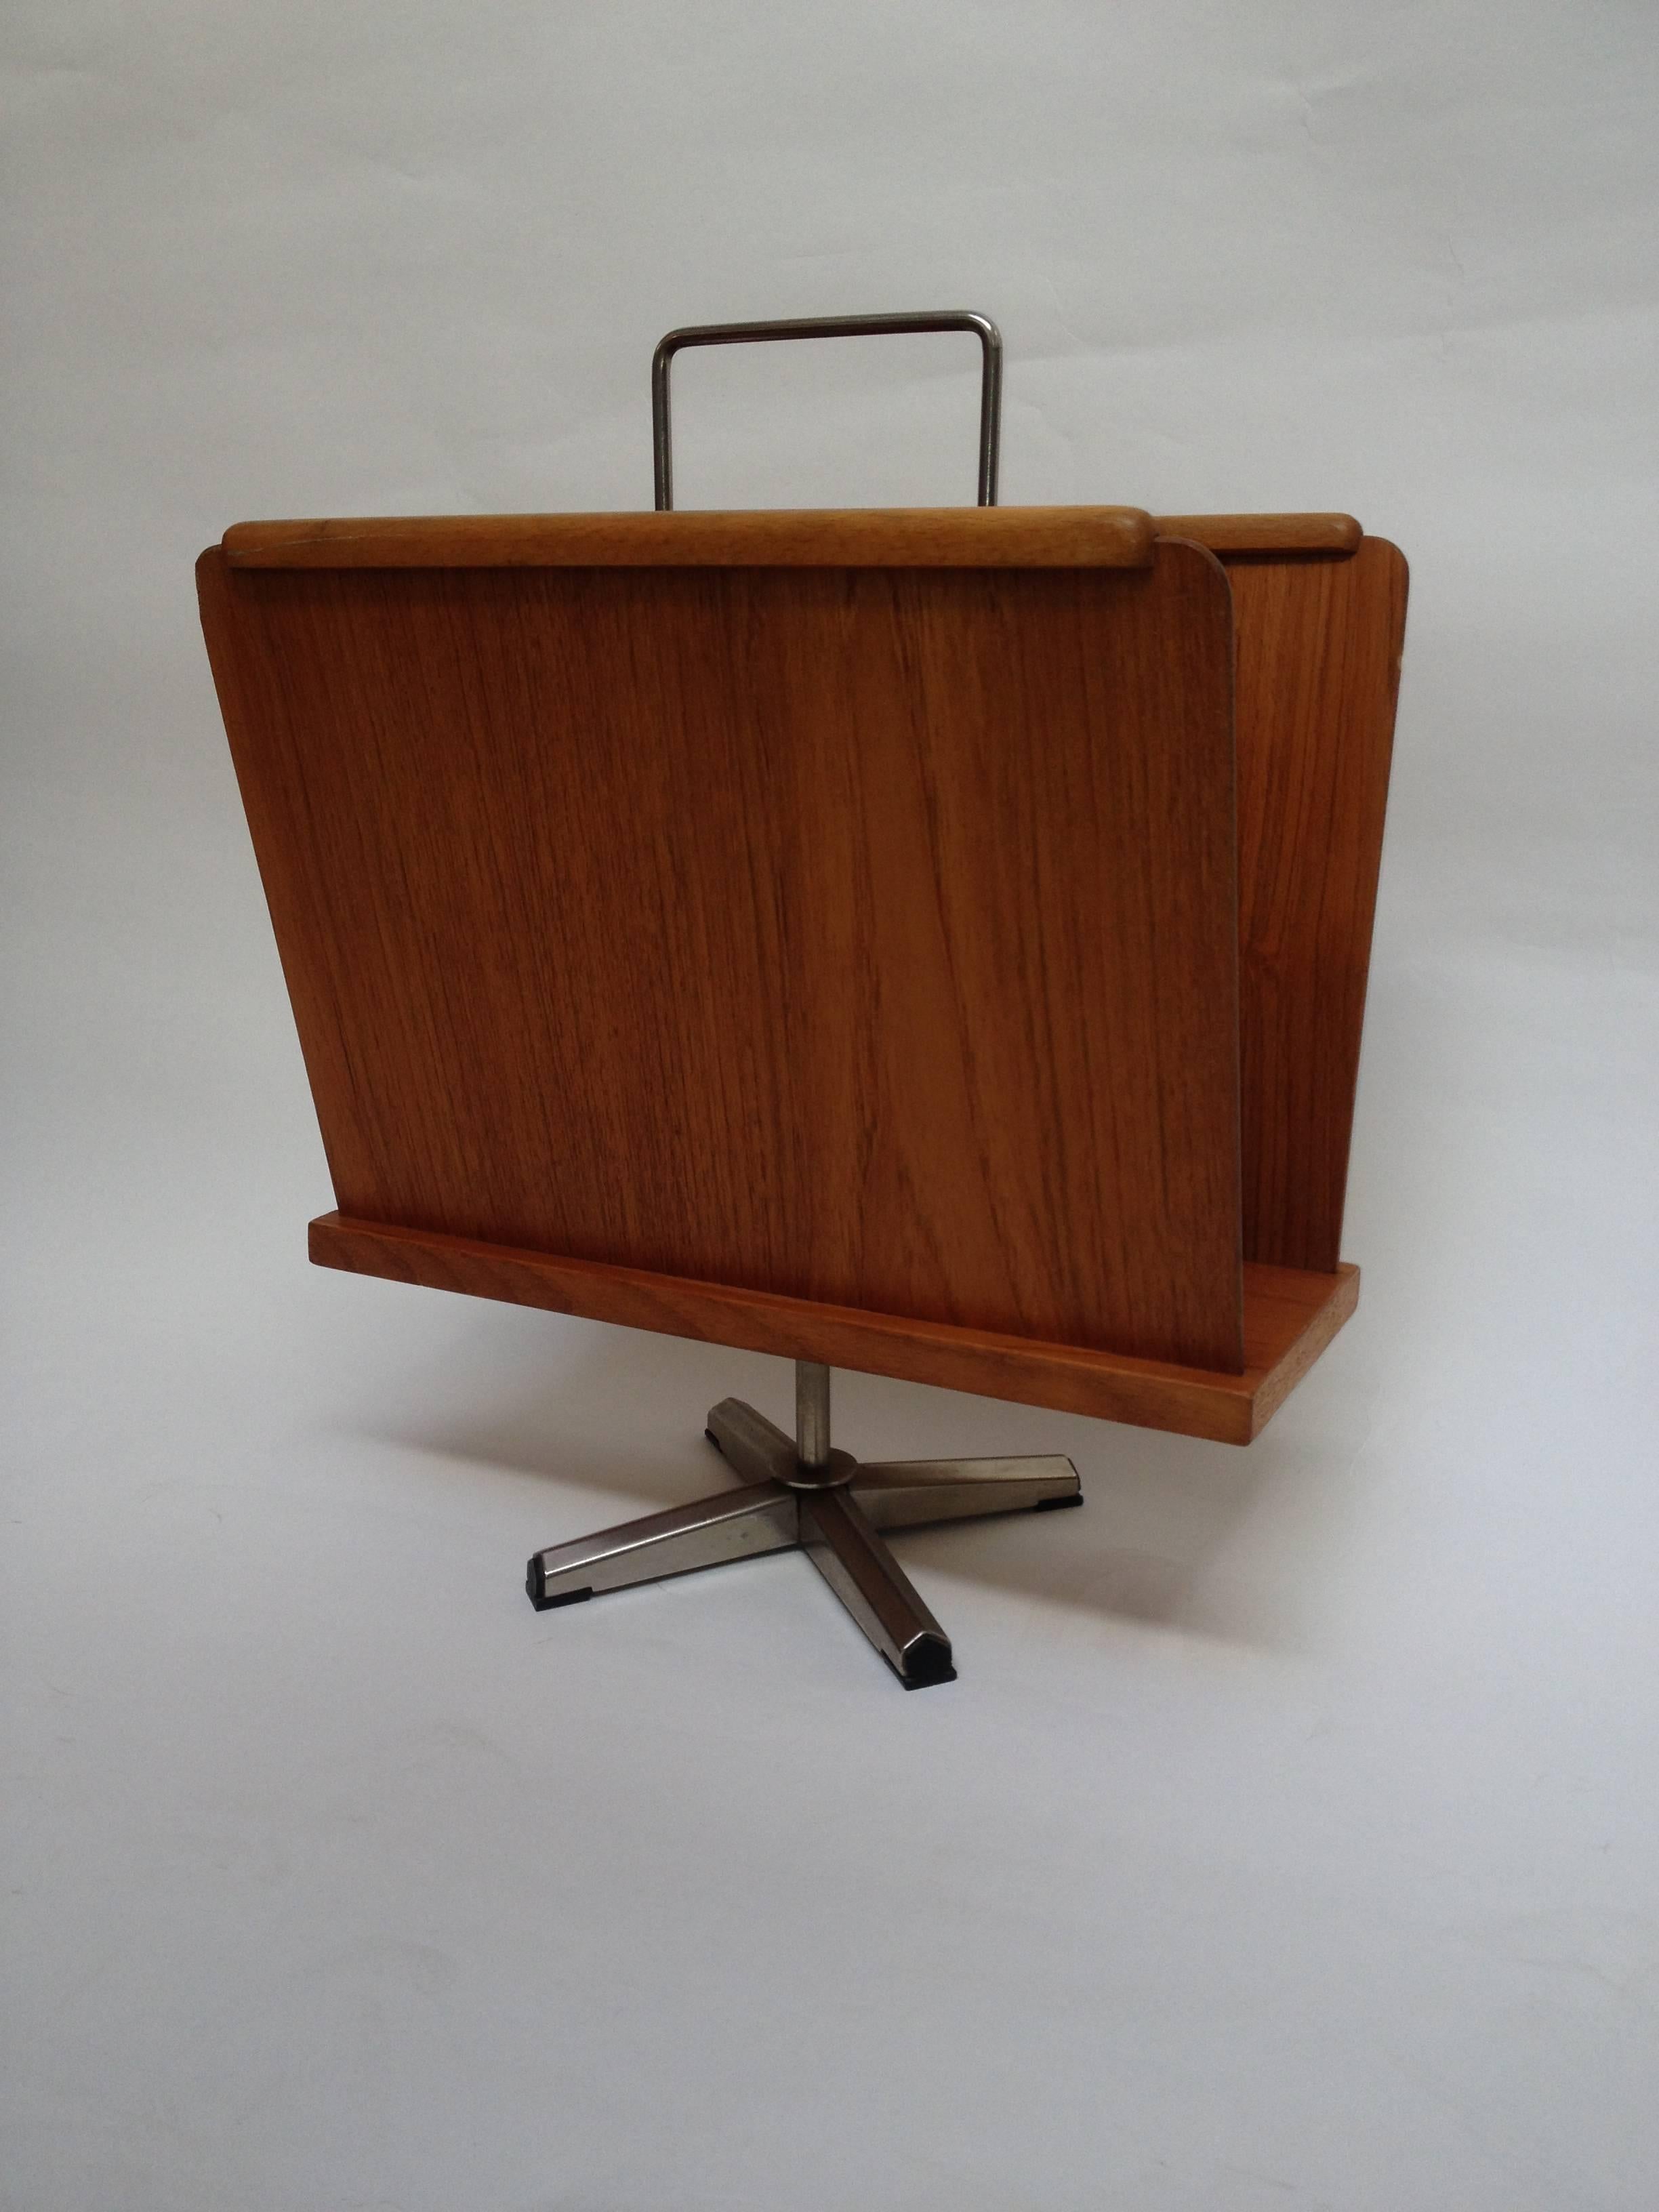 Fabulous 1960s teak/metal magazine rack that swivels, made in Norway. It is in good vintage condition with some wear to one of the corners see photo. Would look fabulous in your Mid-Century abode.